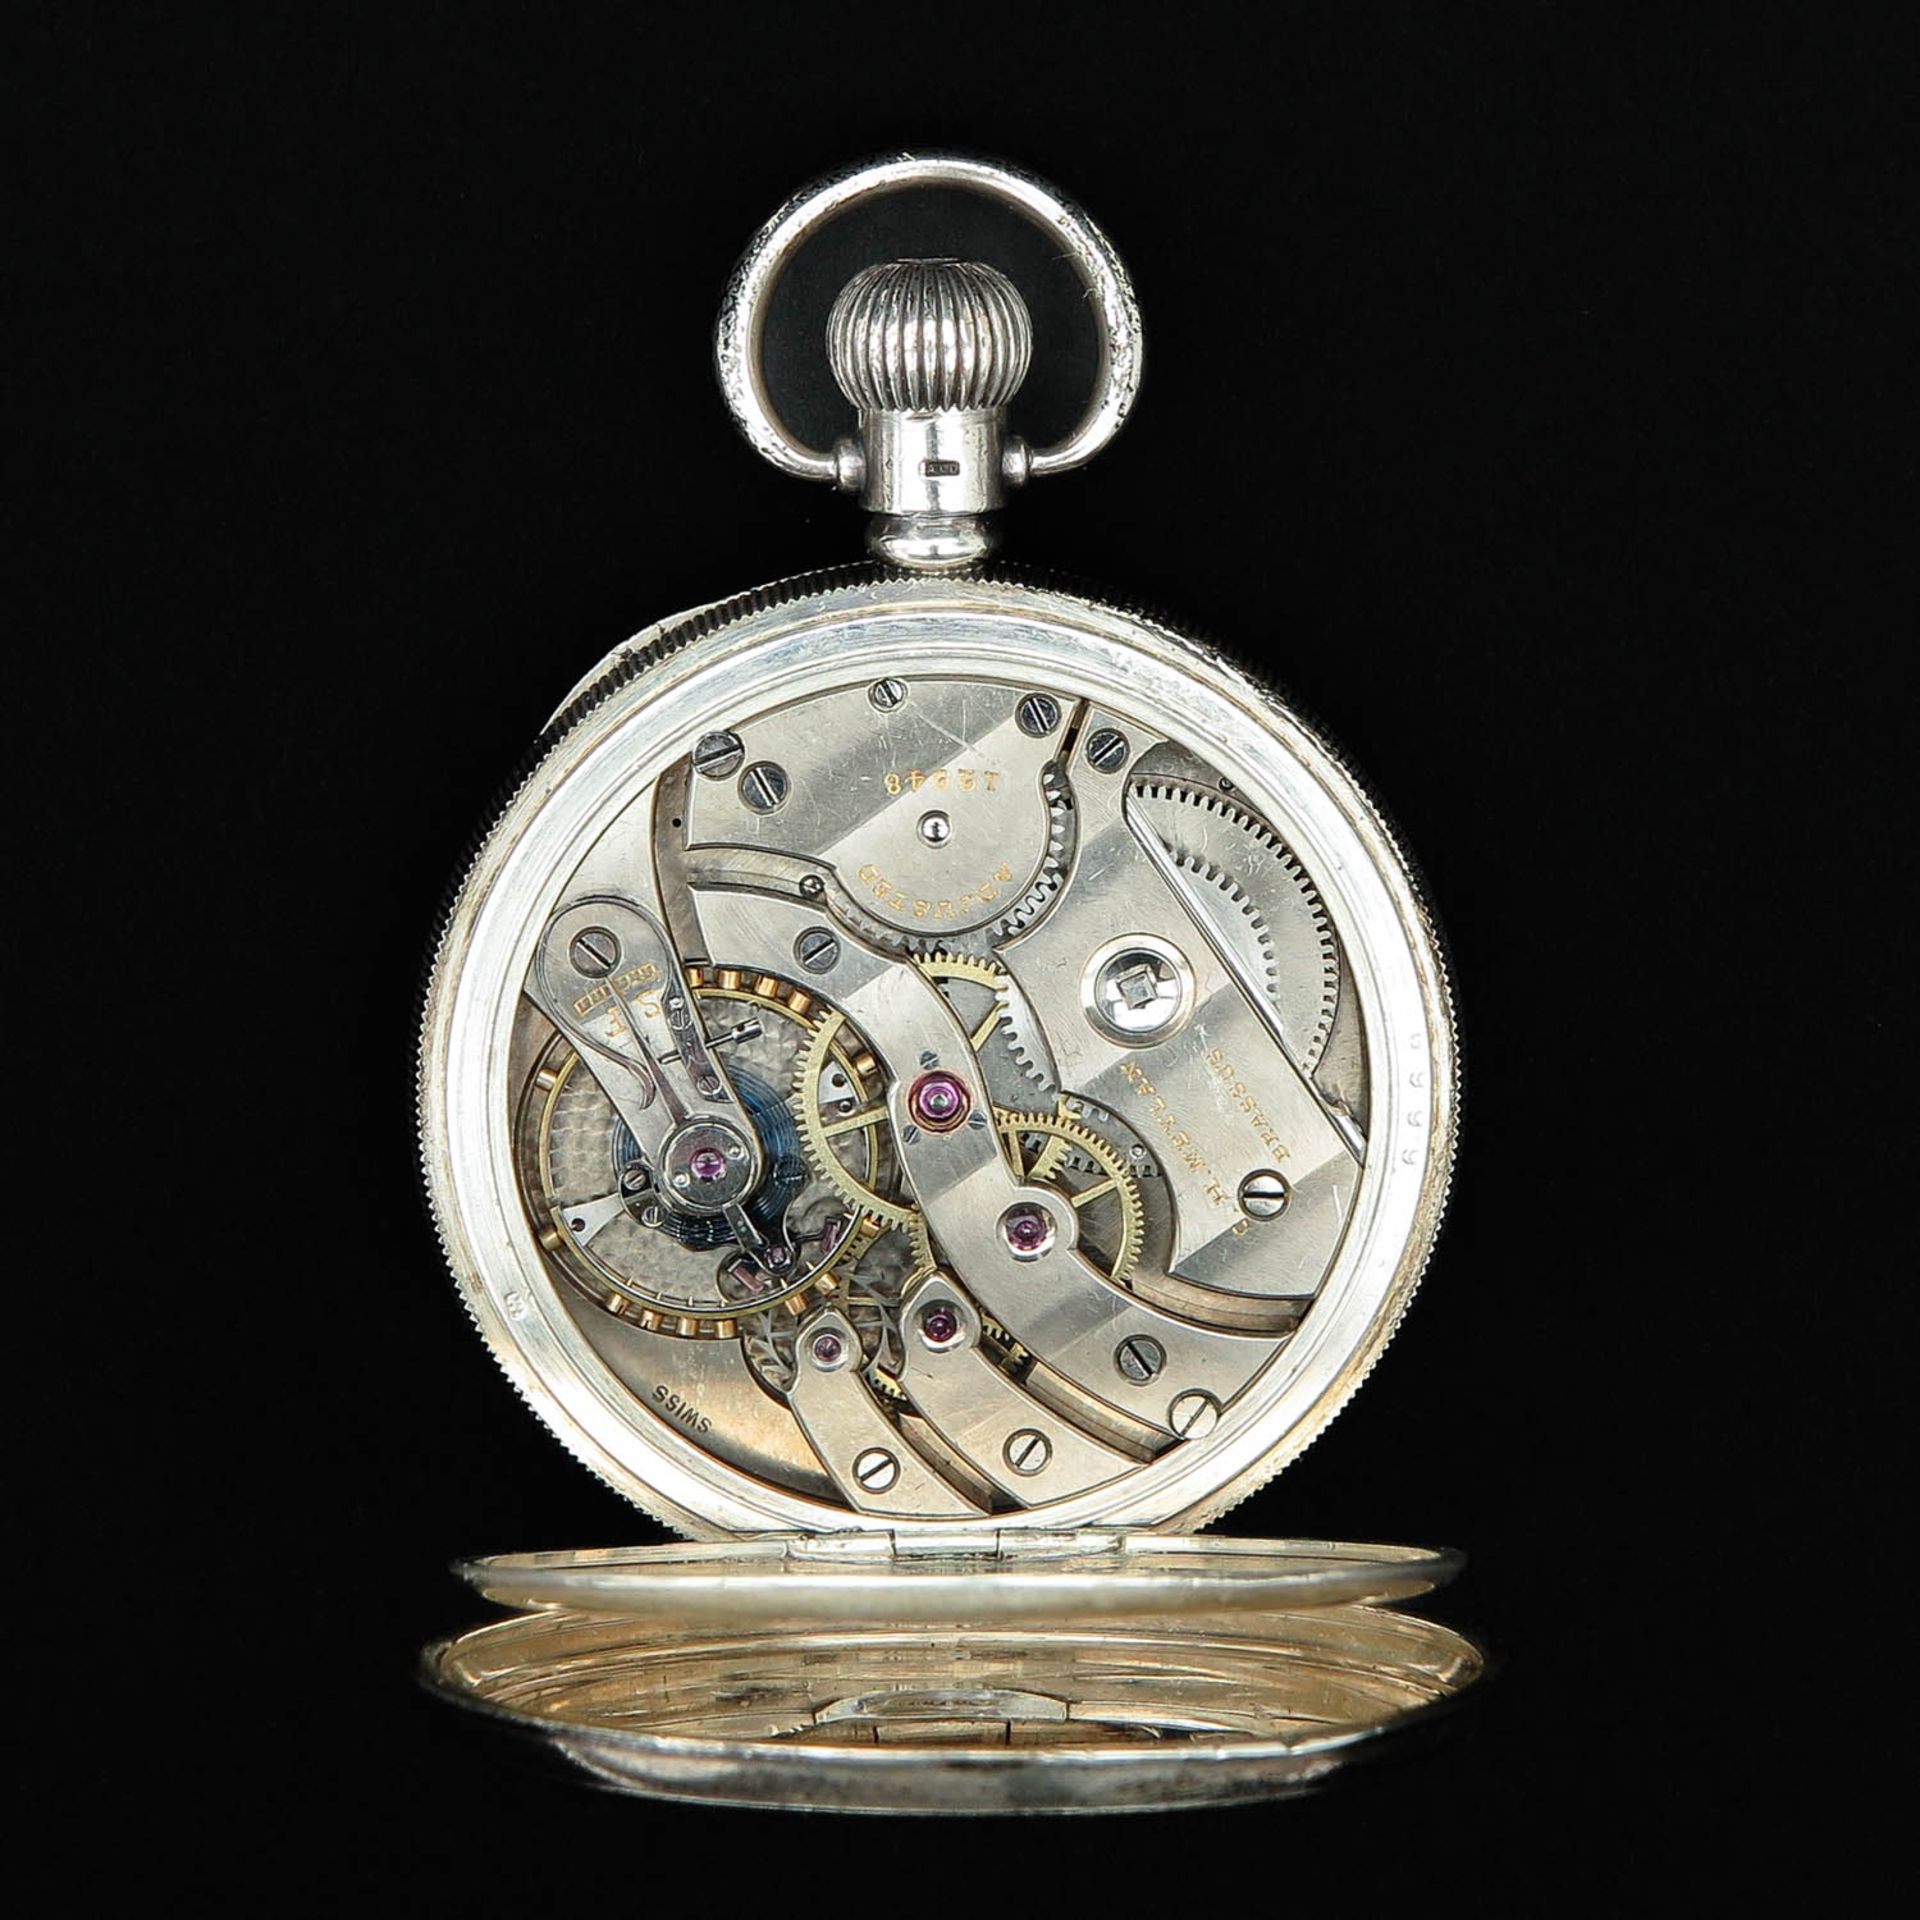 A Silver Pocket Watch Signed G.H. Meylan - Image 4 of 7